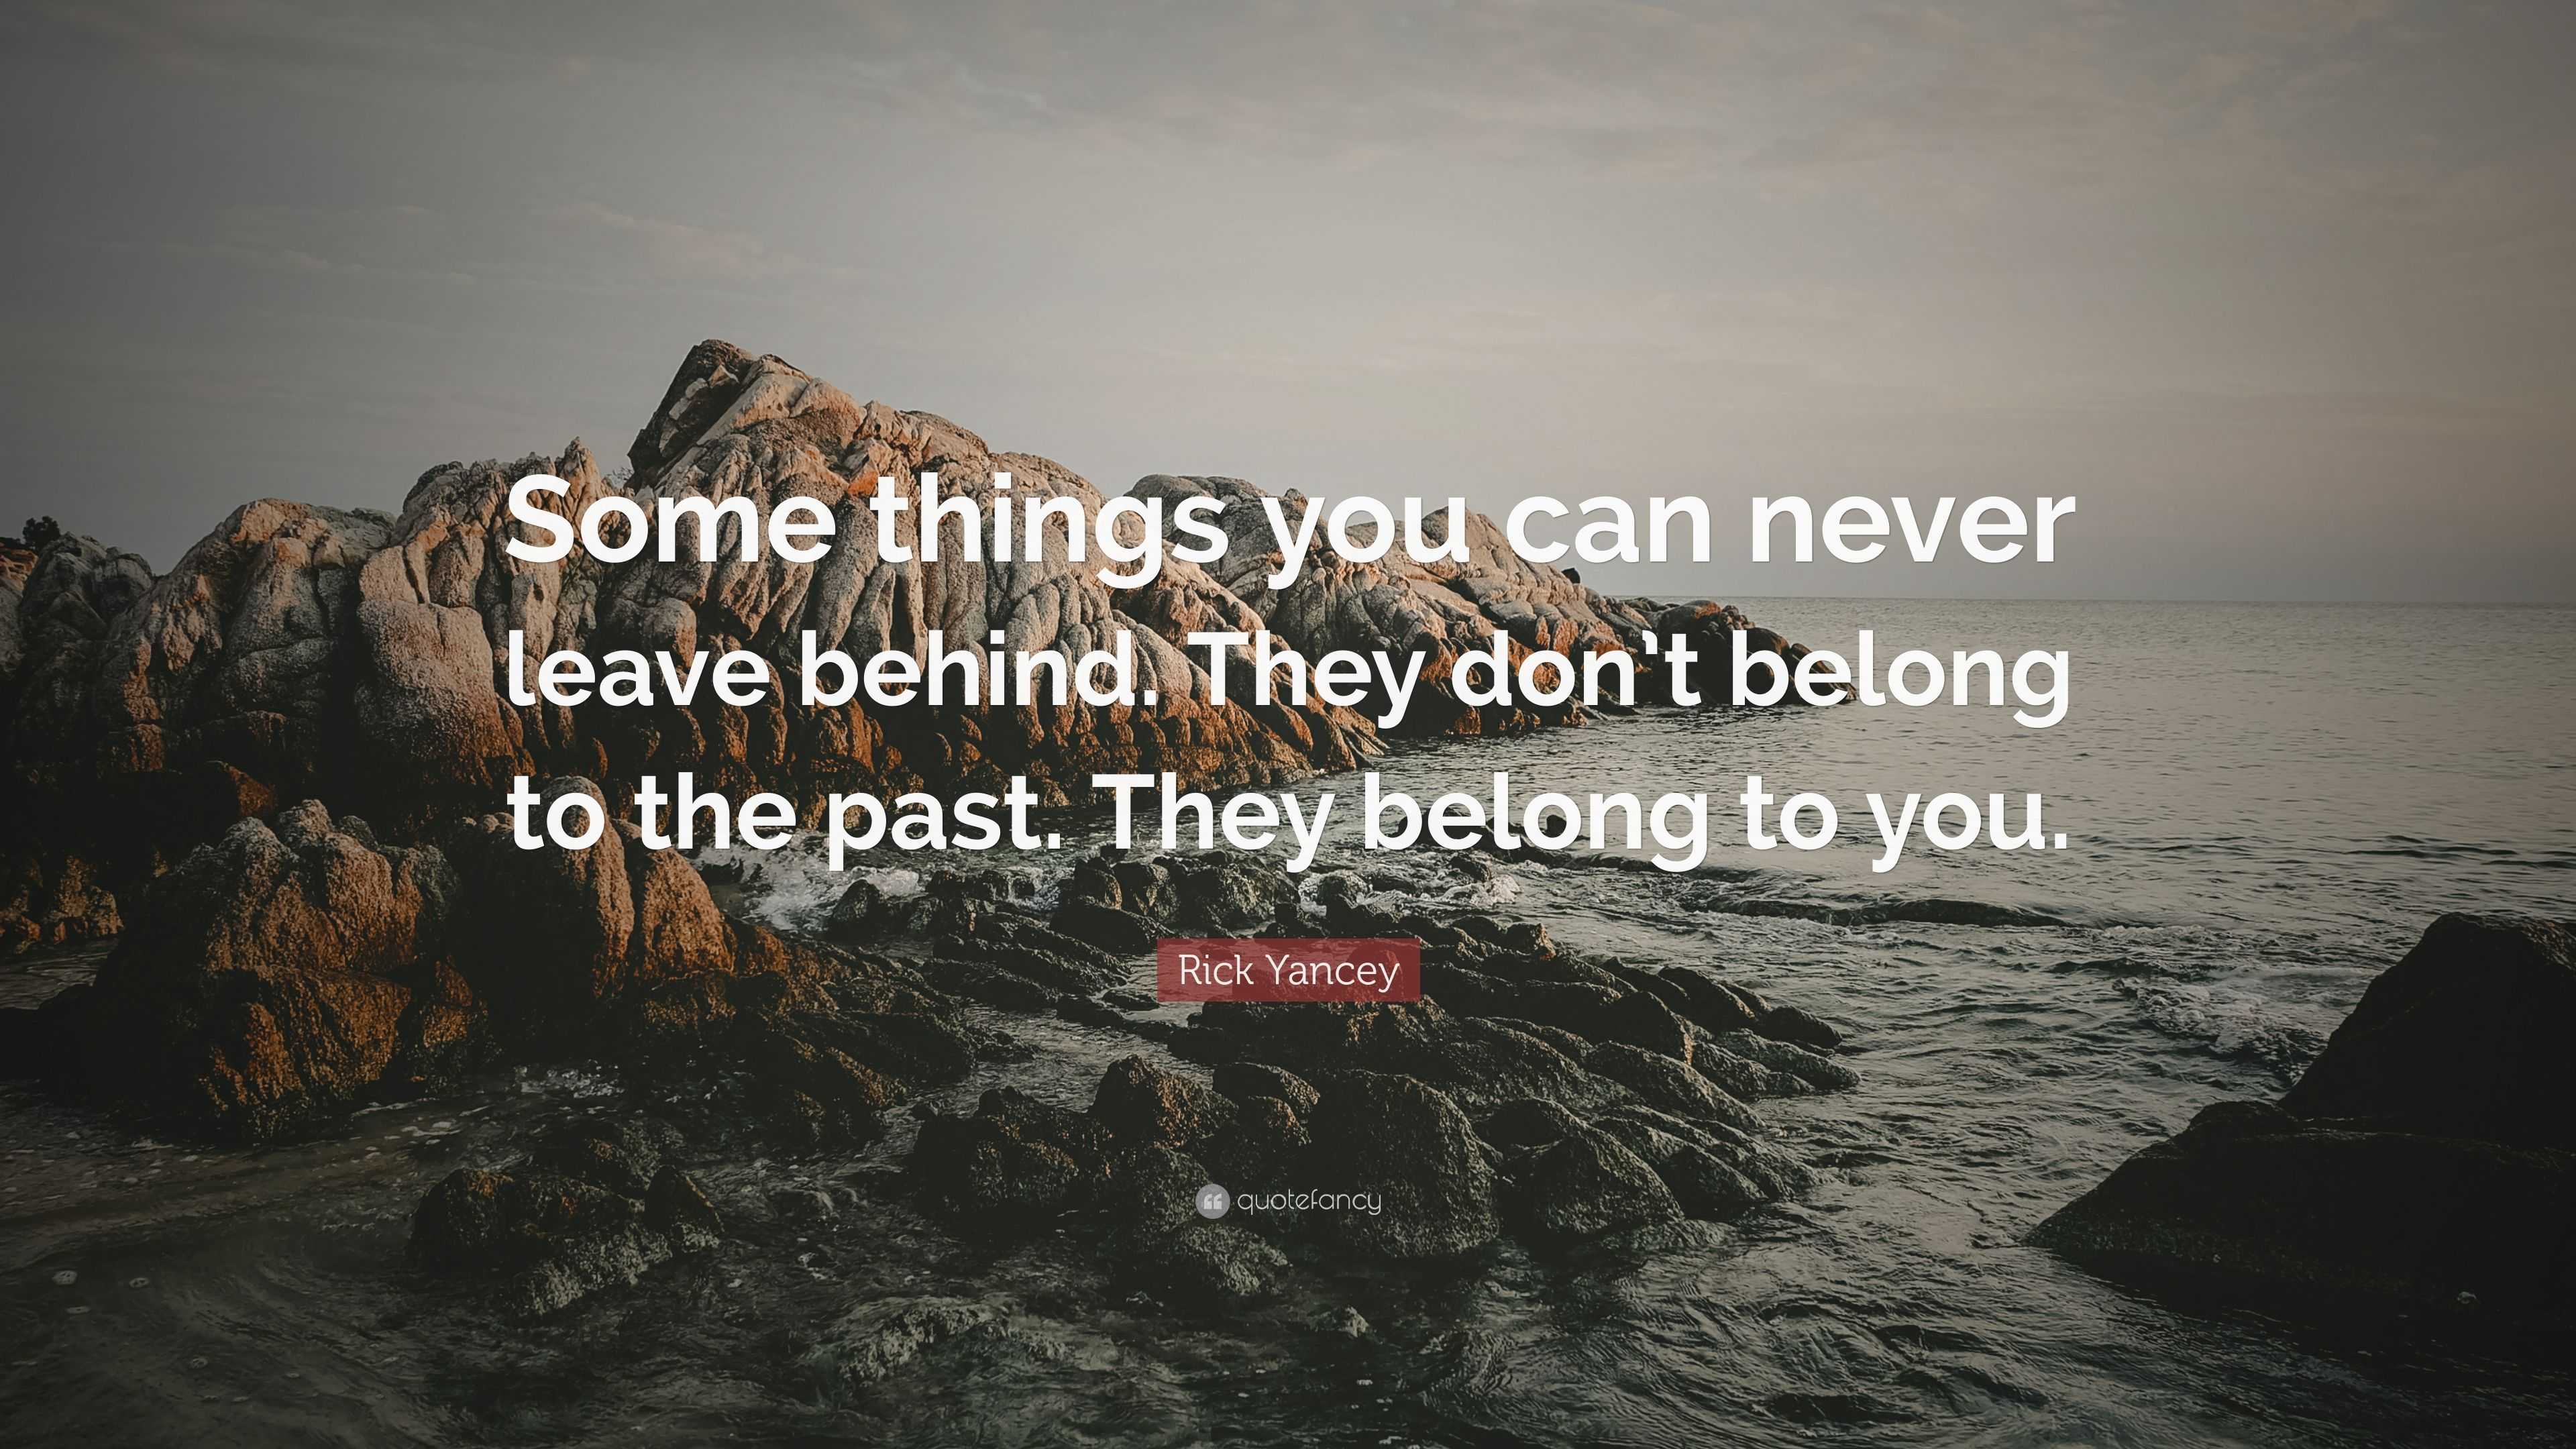 Rick Yancey Quote: “Some things you can never leave behind. They don’t ...